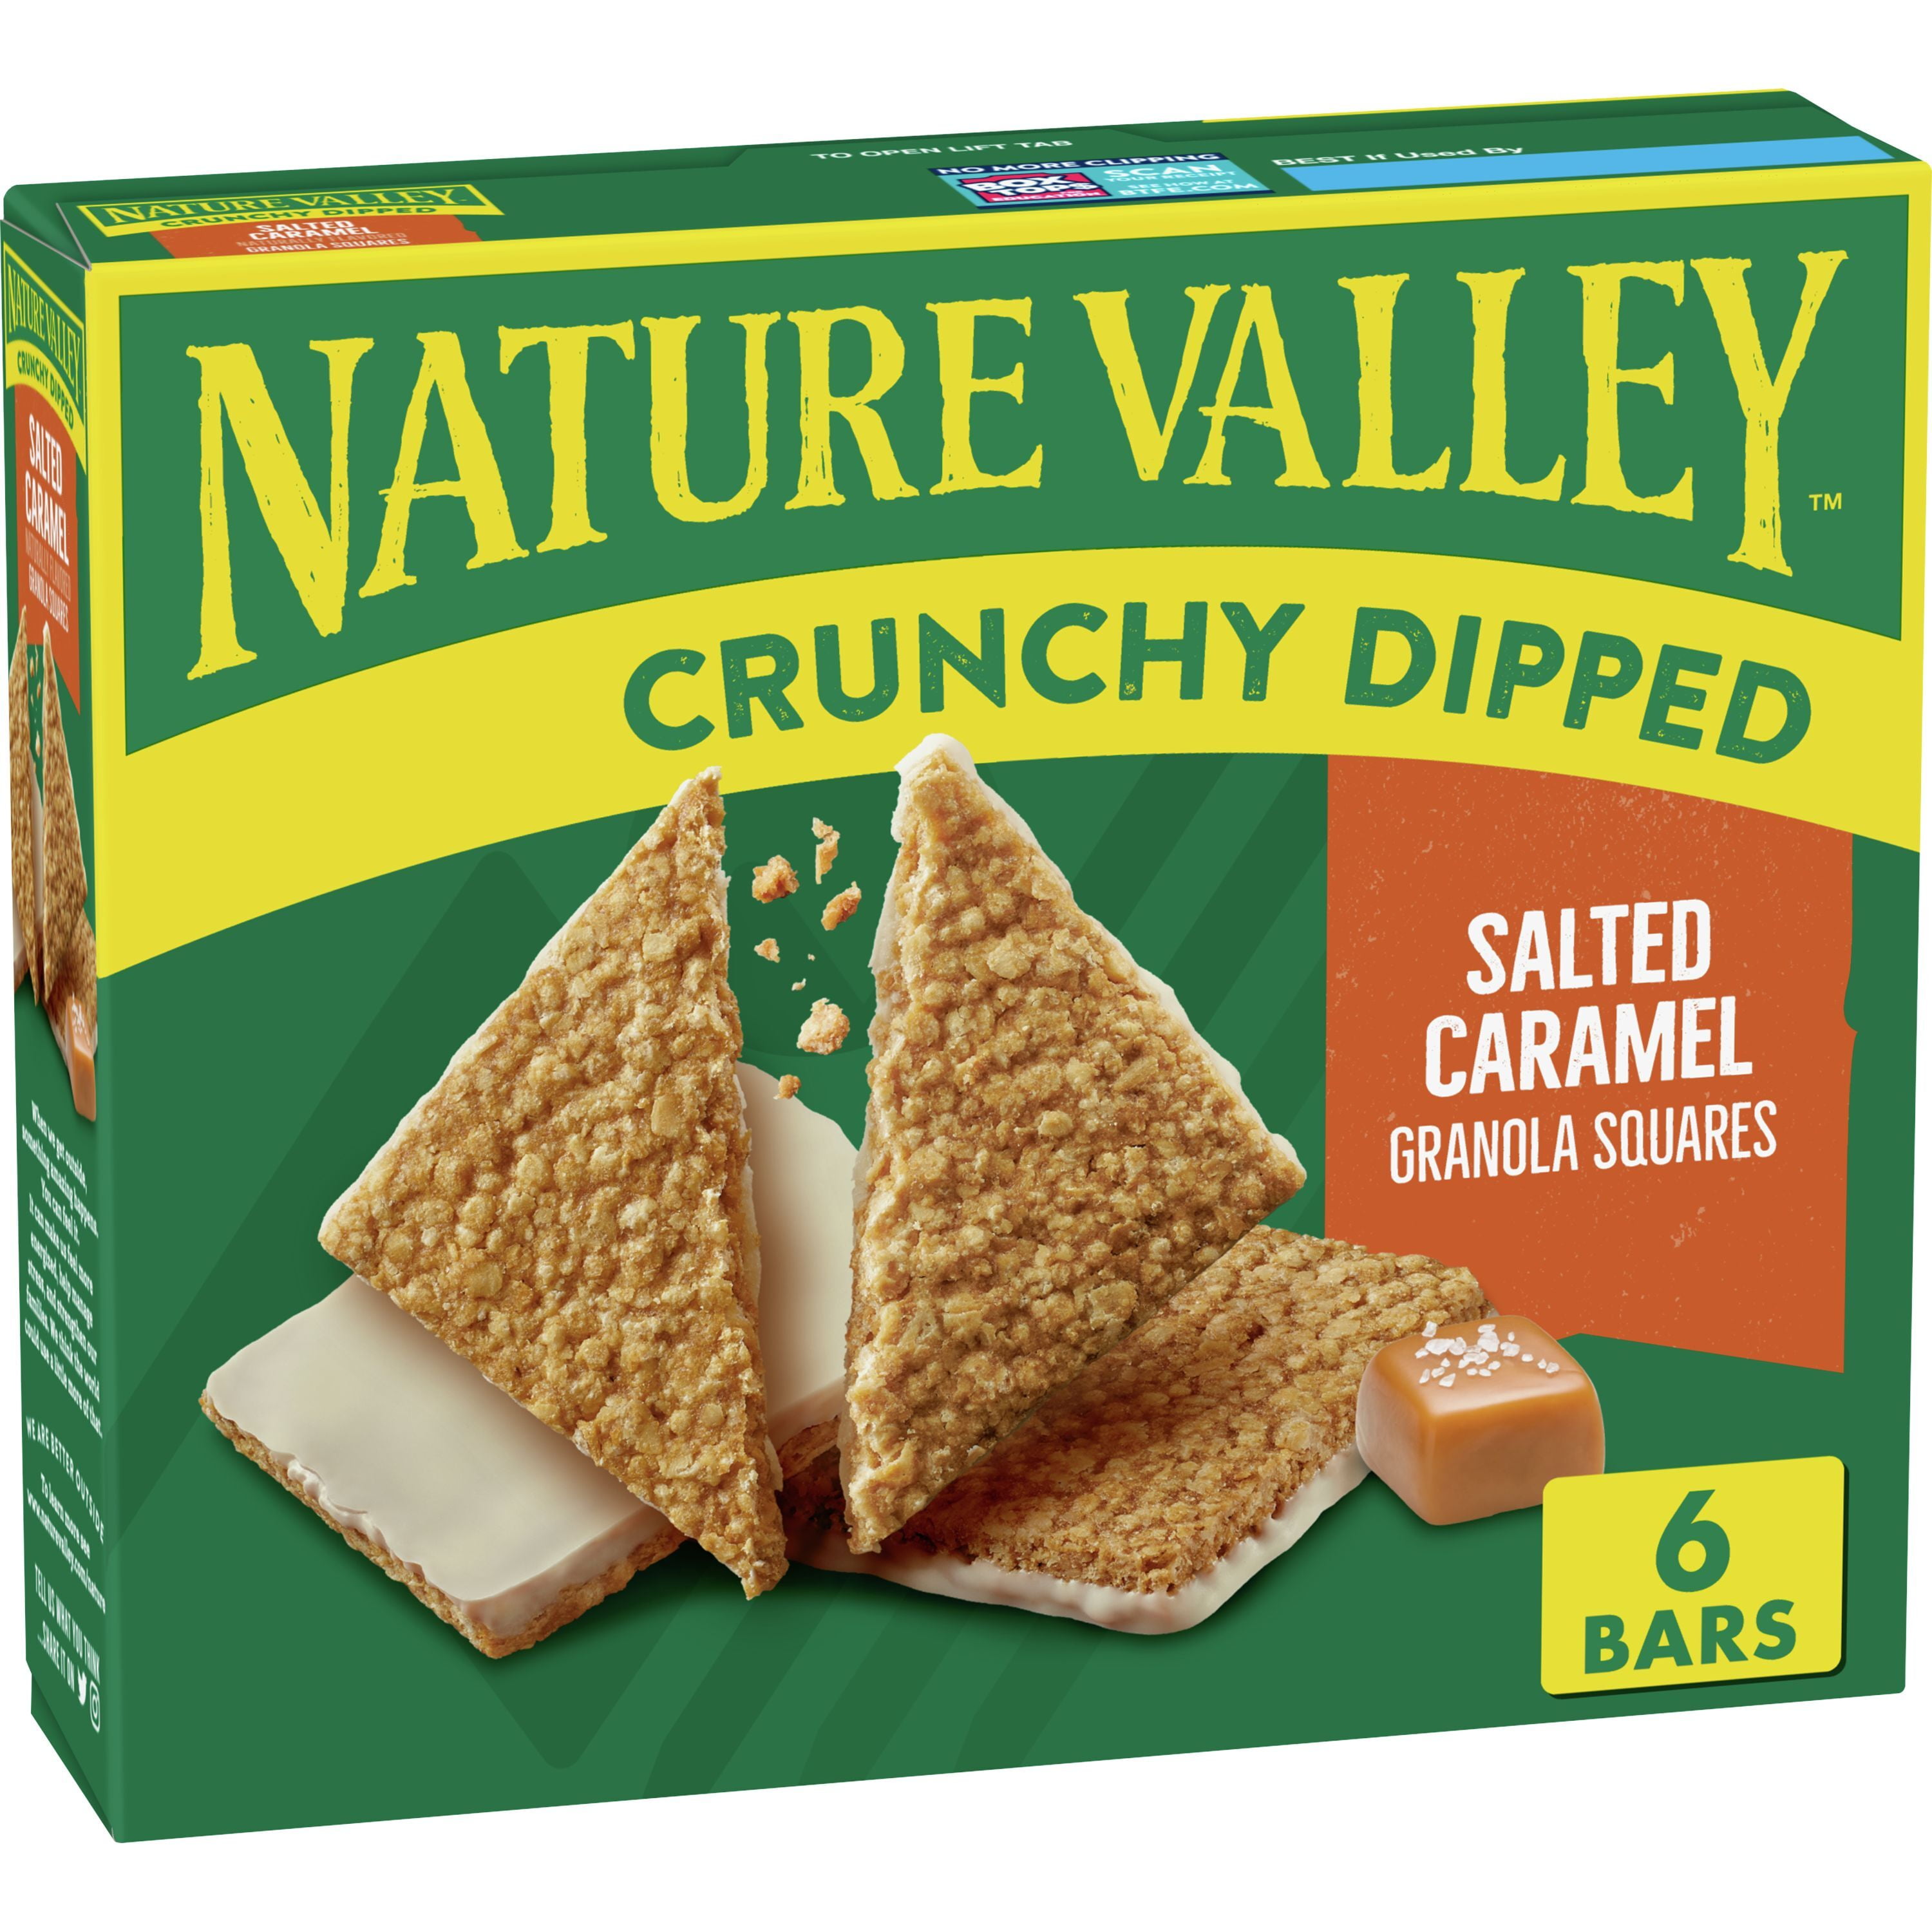 Nature Valley Crunchy Dipped Granola Squares, Salted Caramel, 6 ct